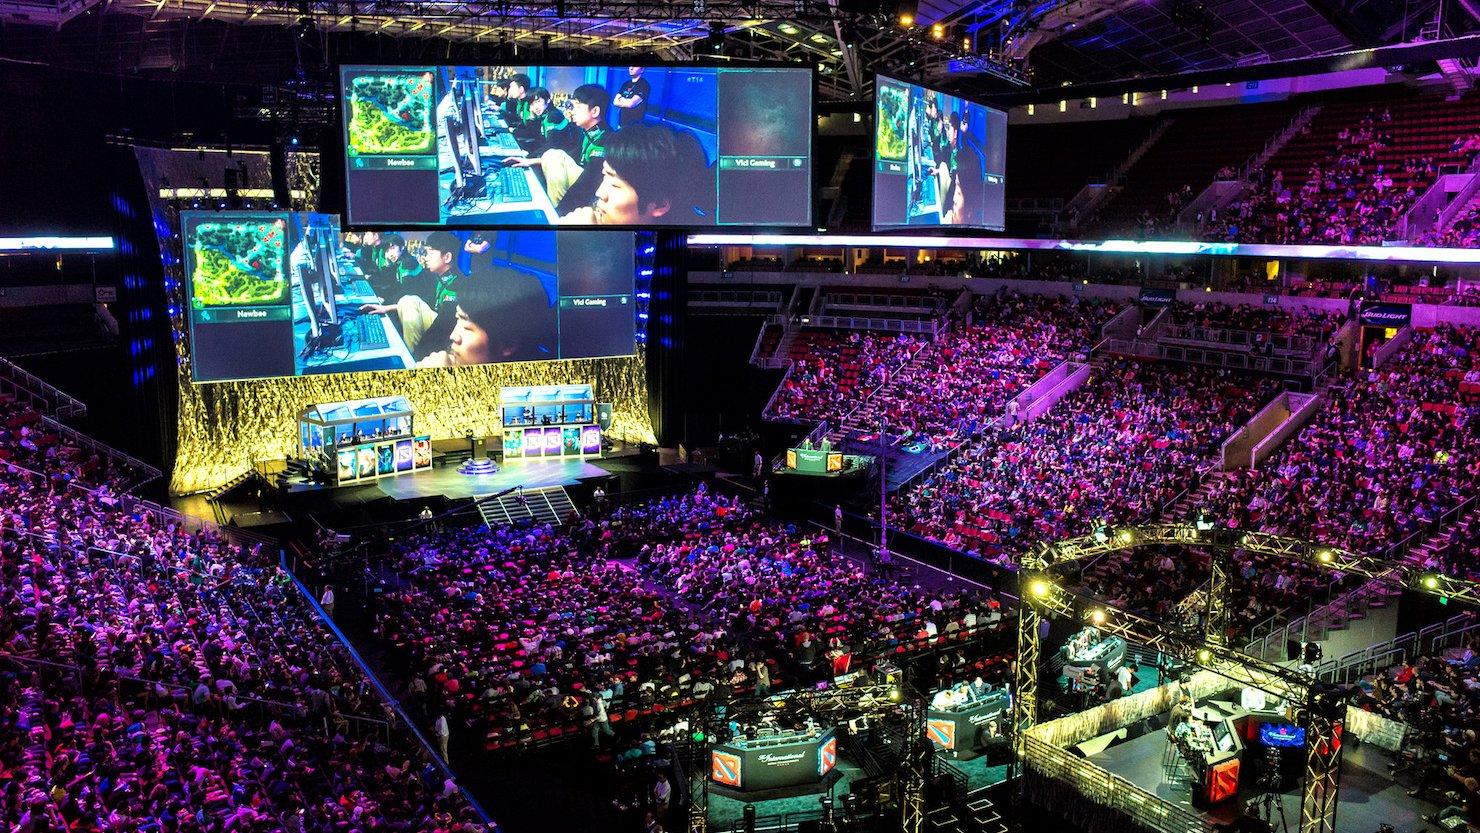 Weekly sports betting news roundup: From eSports to Arizona, progress continues